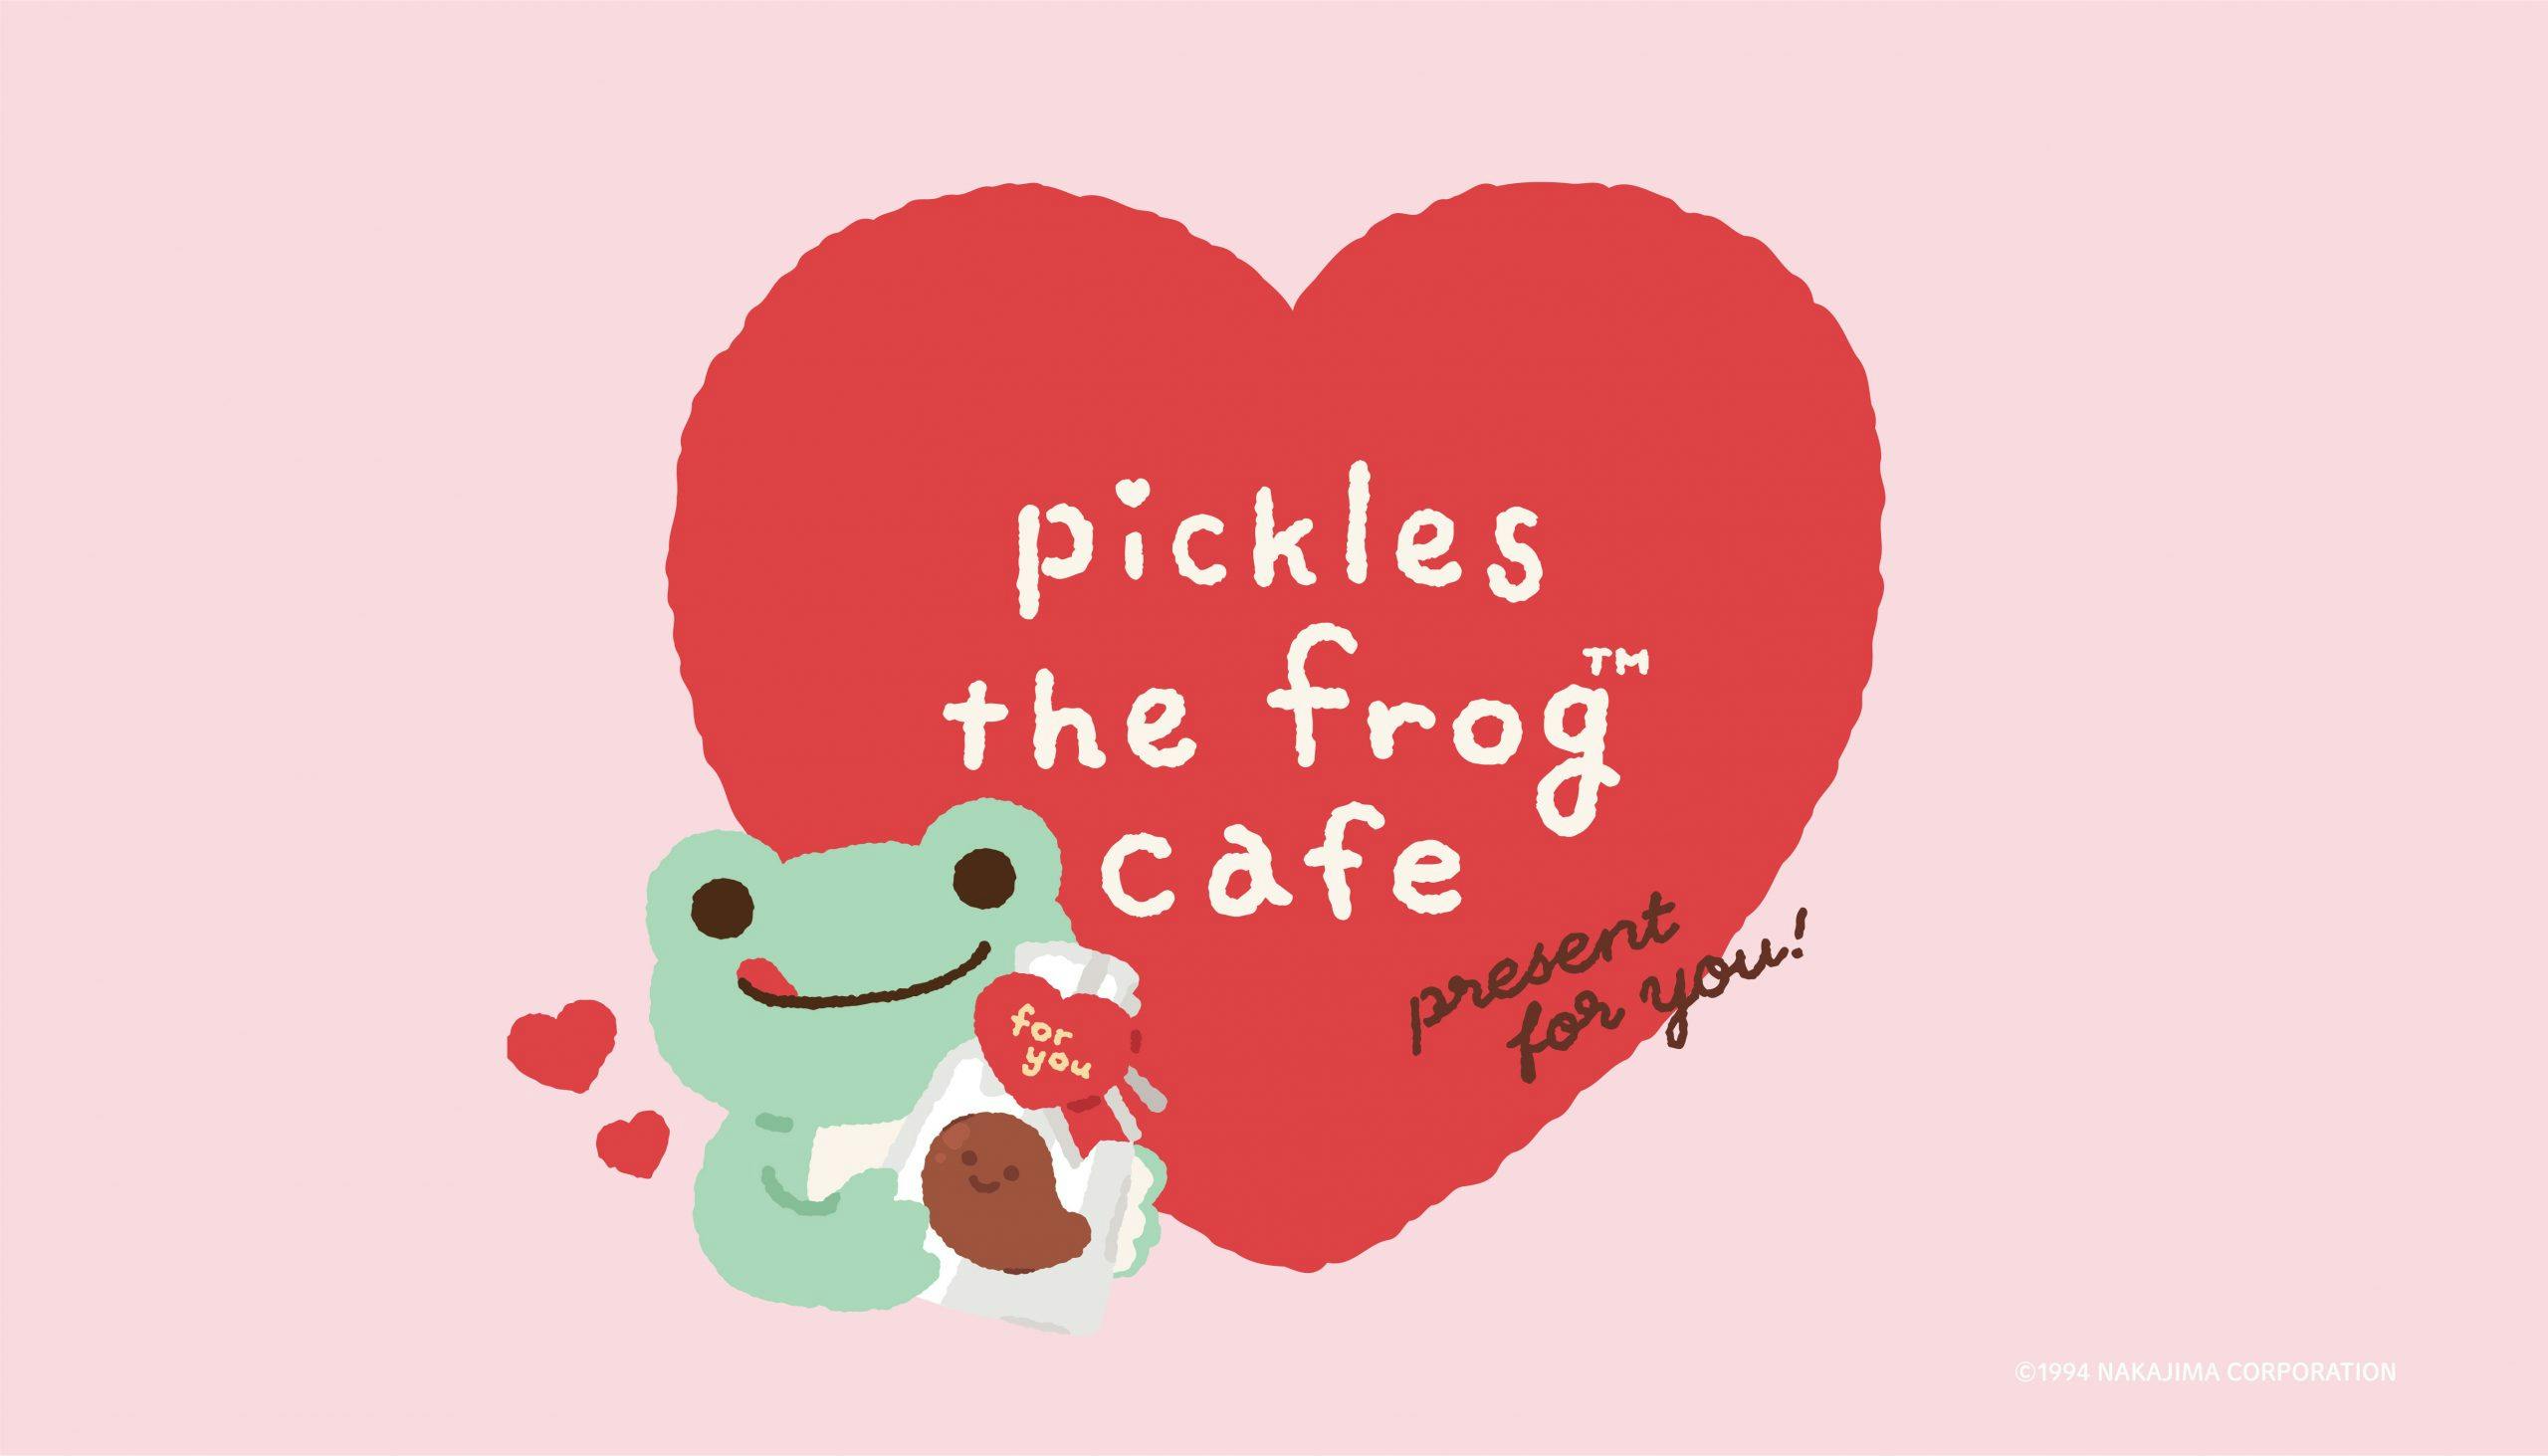 Pickles the flog cafe ～Present for you～